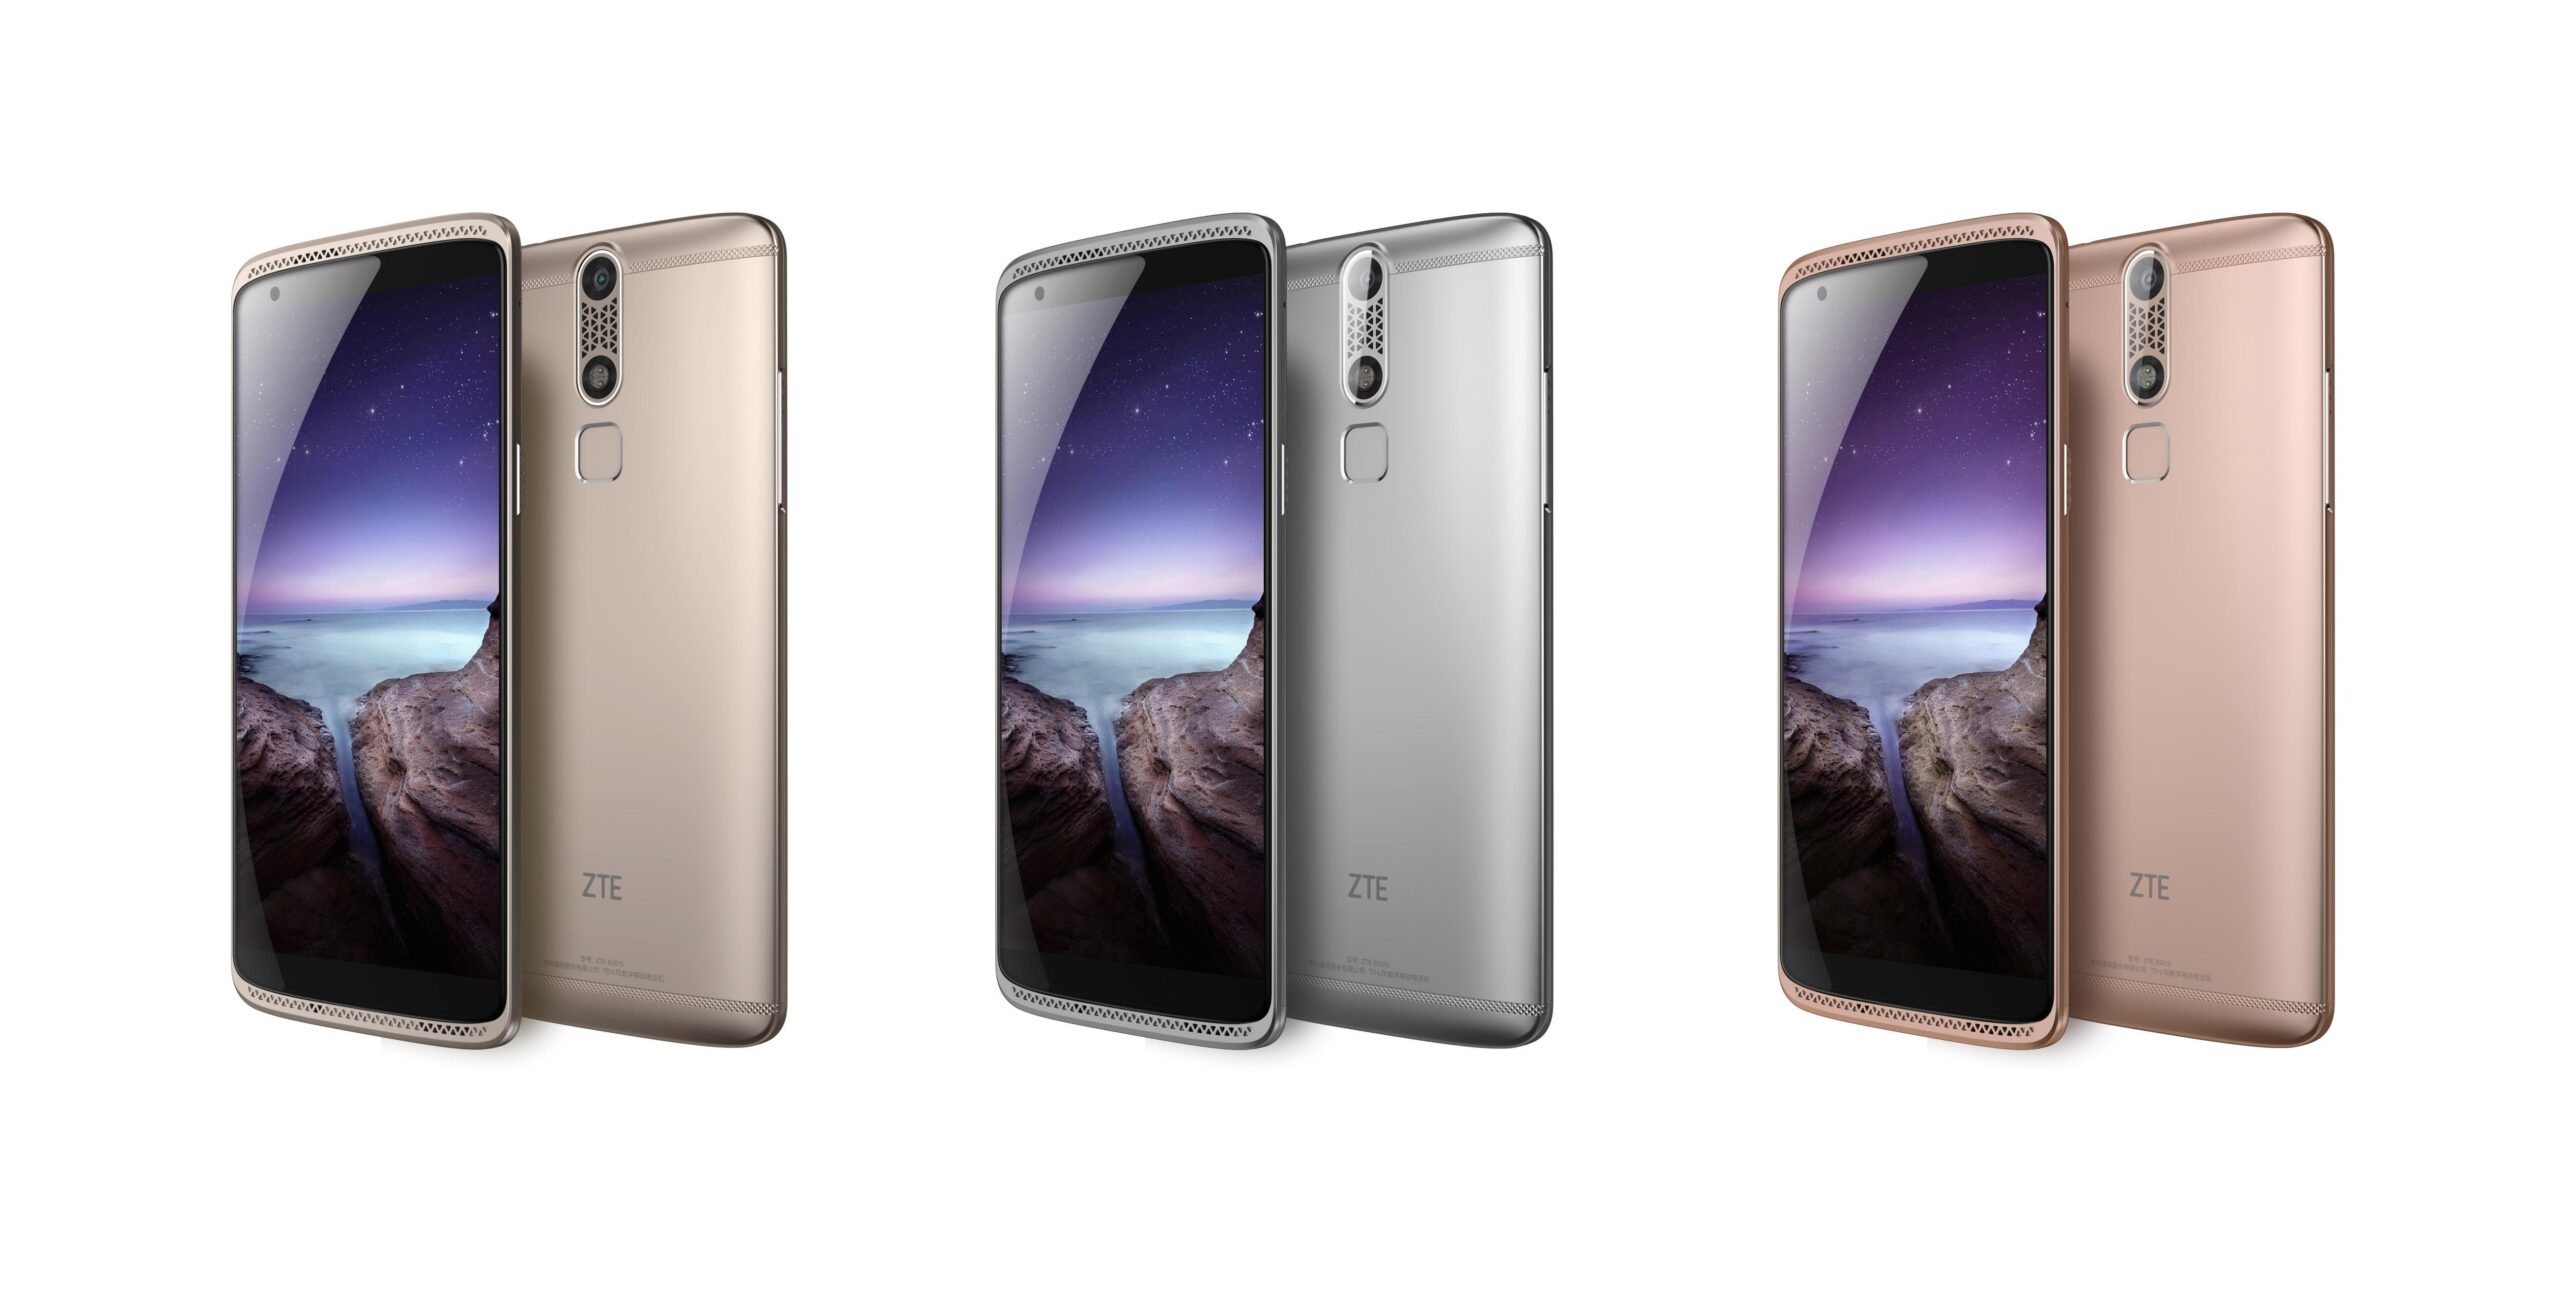 ZTE_AXON_mini_availabile_in_three_color_options_-_Ion_Gold,_Chromium_Silver_and_Rose_Gold2